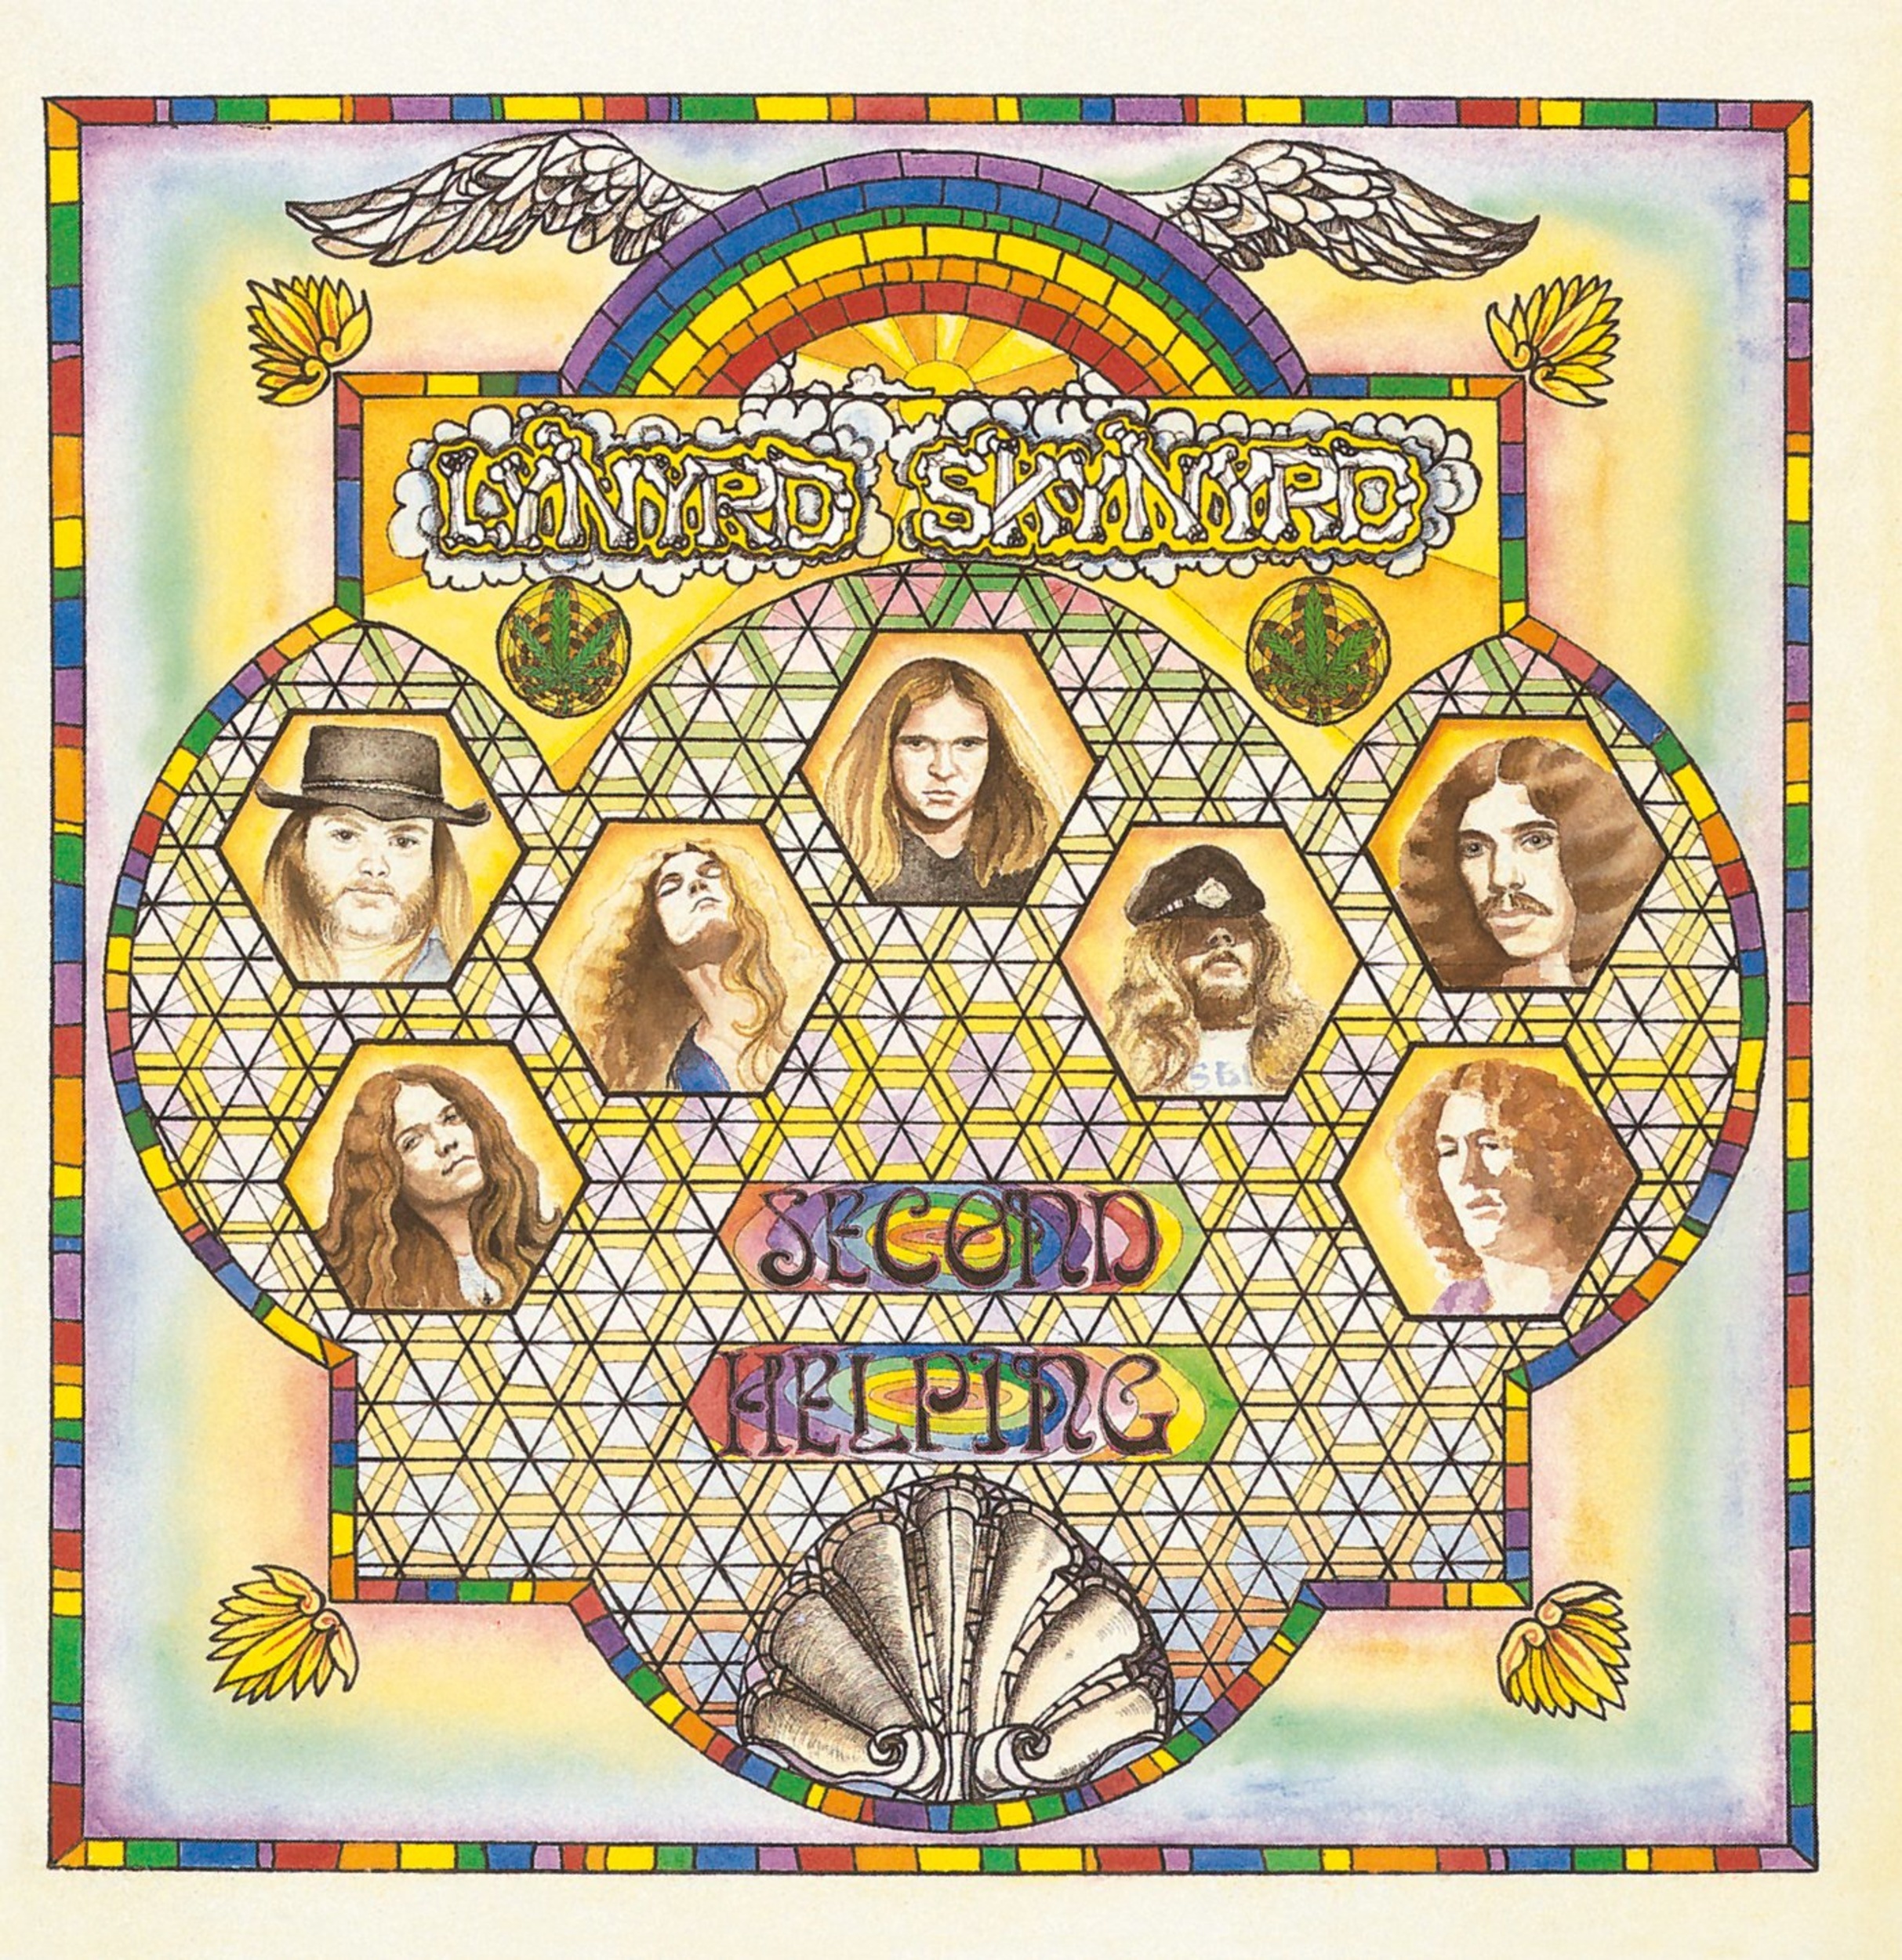 <p>The Skynyrd boys were essentially simple folk who hadn't often left their hometown area of Jacksonville, Fla., before signing a record deal and heading out on tour. "<a href="https://www.youtube.com/watch?v=oLPCyt9ine8">The Needle and the Spoon</a>," from 1974's <em>Second </em><em>Helping, </em>examines the pitfalls of hard drugs that were becoming more available the more famous the band became. They were learning on the fly when it came to substance abuse, and the lessons were often harsh. </p><p><a href='https://www.msn.com/en-us/community/channel/vid-cj9pqbr0vn9in2b6ddcd8sfgpfq6x6utp44fssrv6mc2gtybw0us'>Follow us on MSN to see more of our exclusive entertainment content.</a></p>